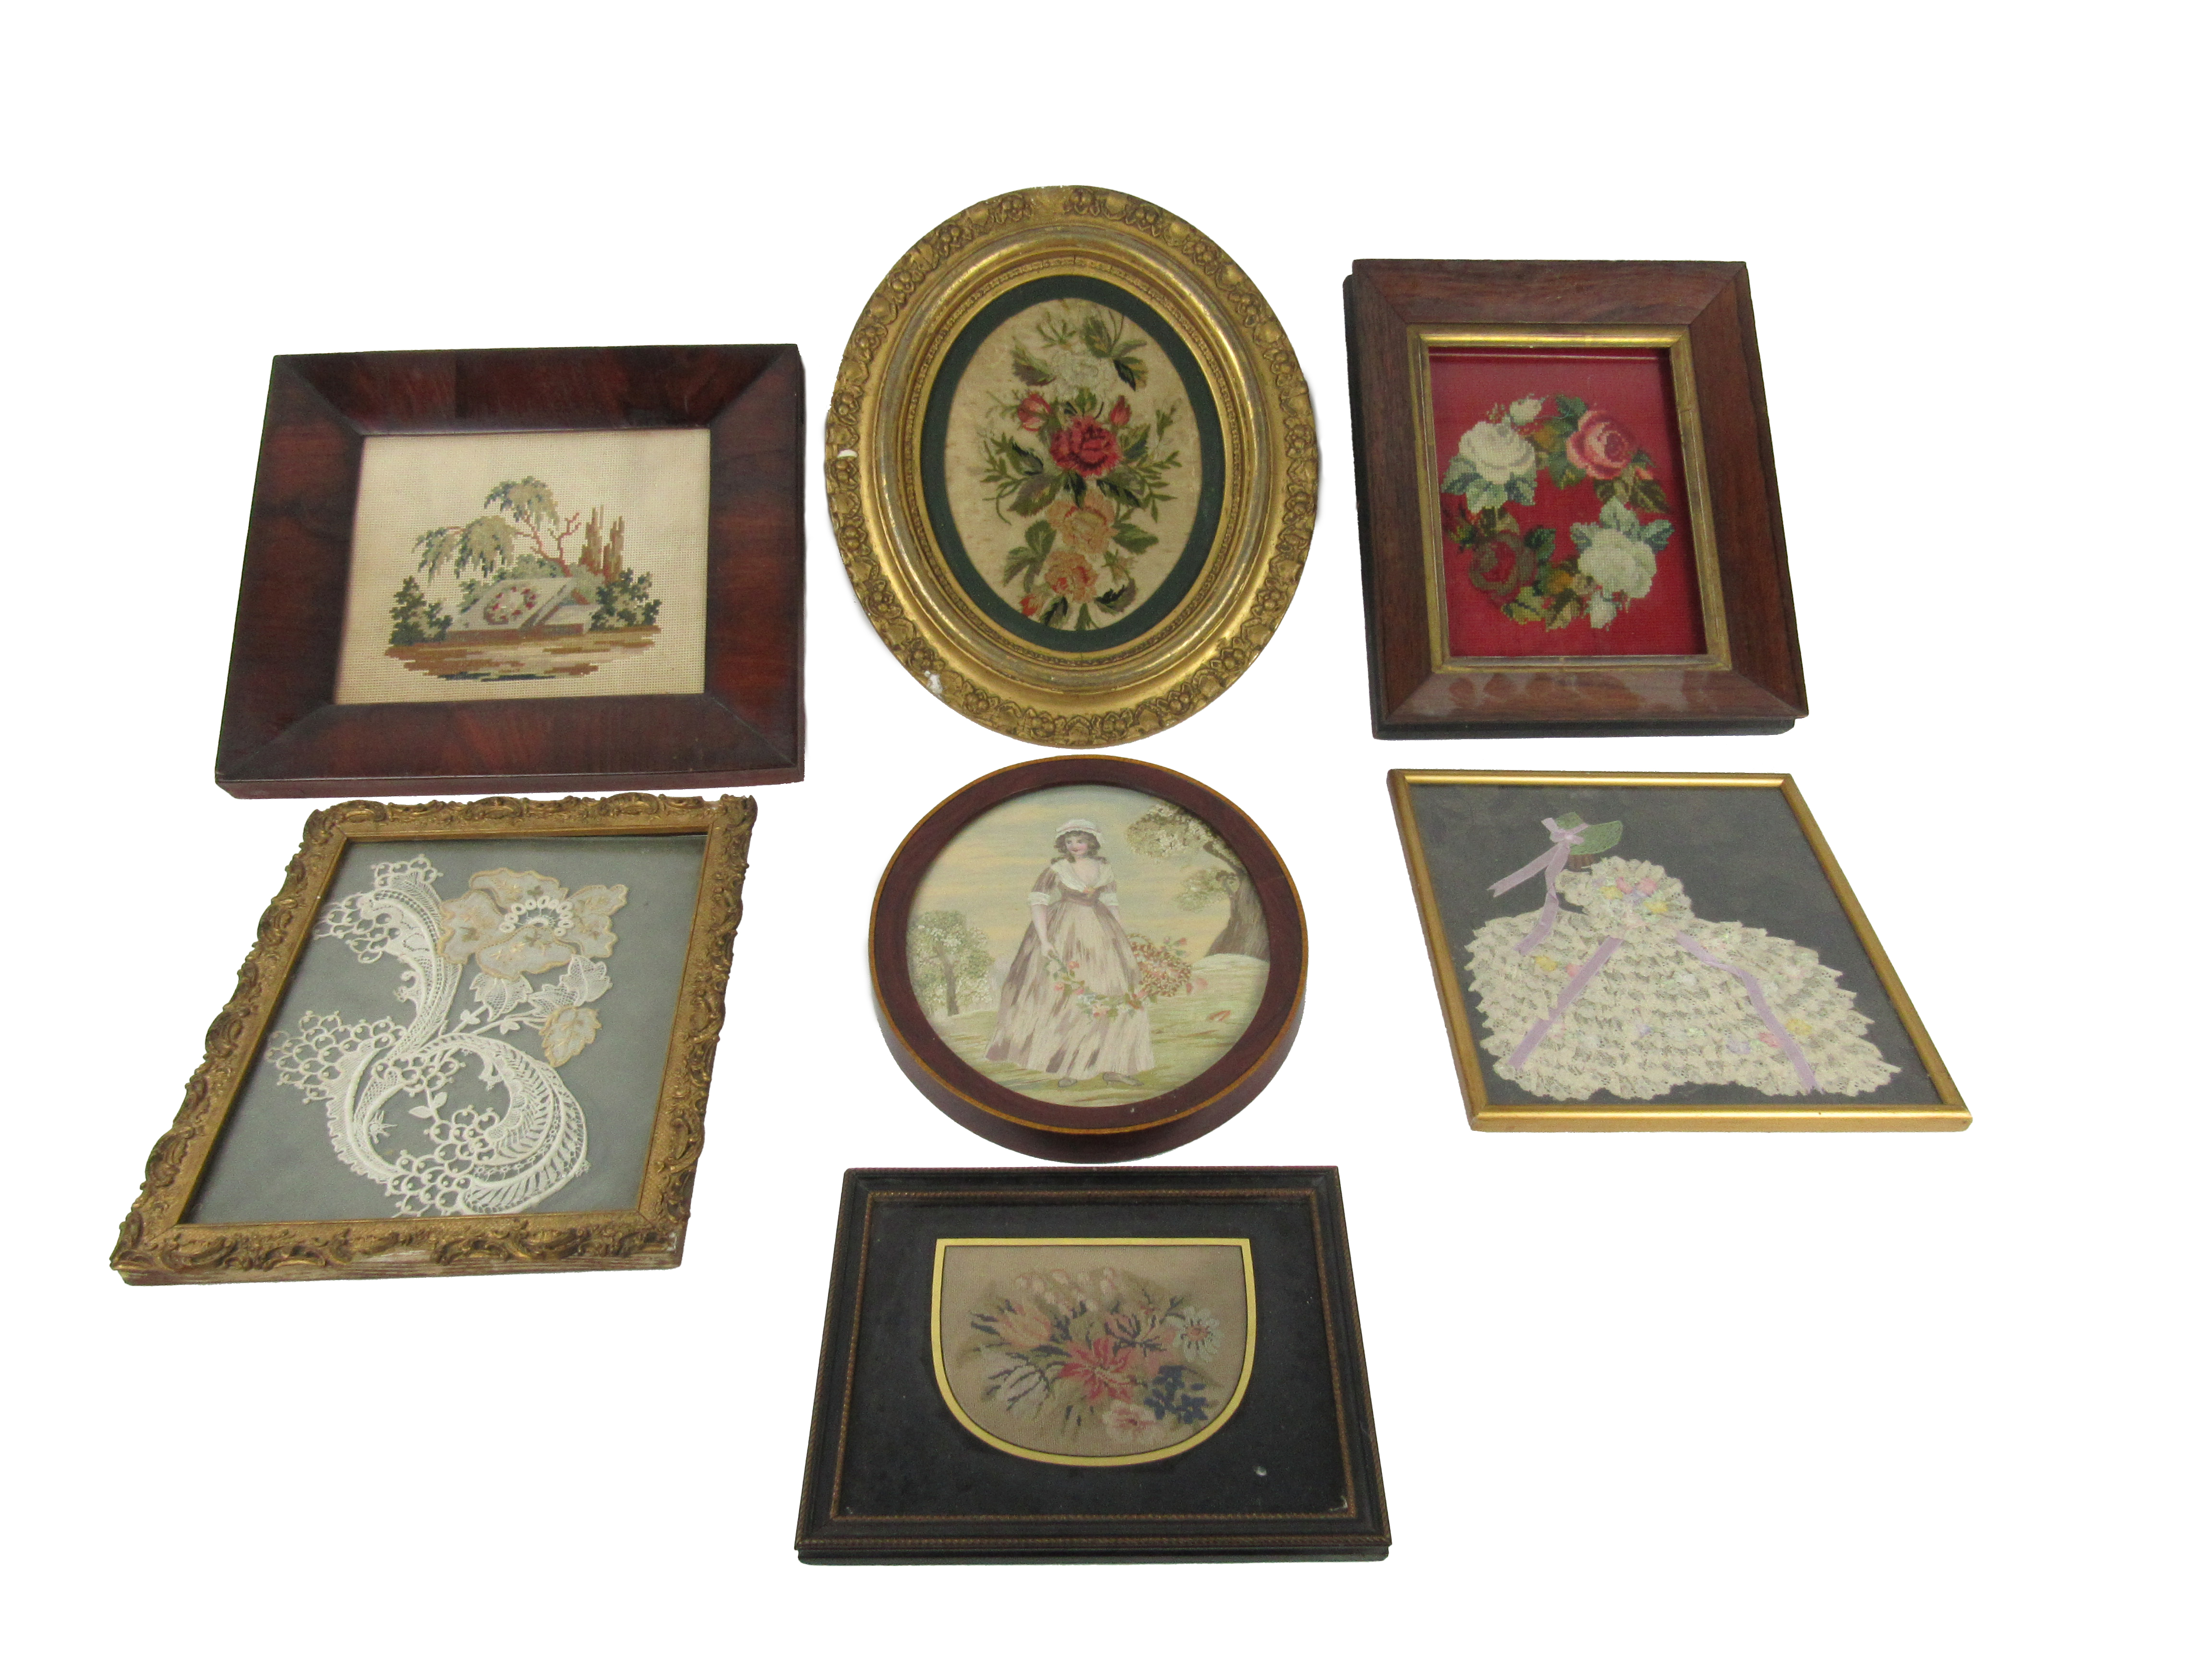 A large collection of small framed embroidered tapestry Samples, mostly floral subjects, framed. (7)